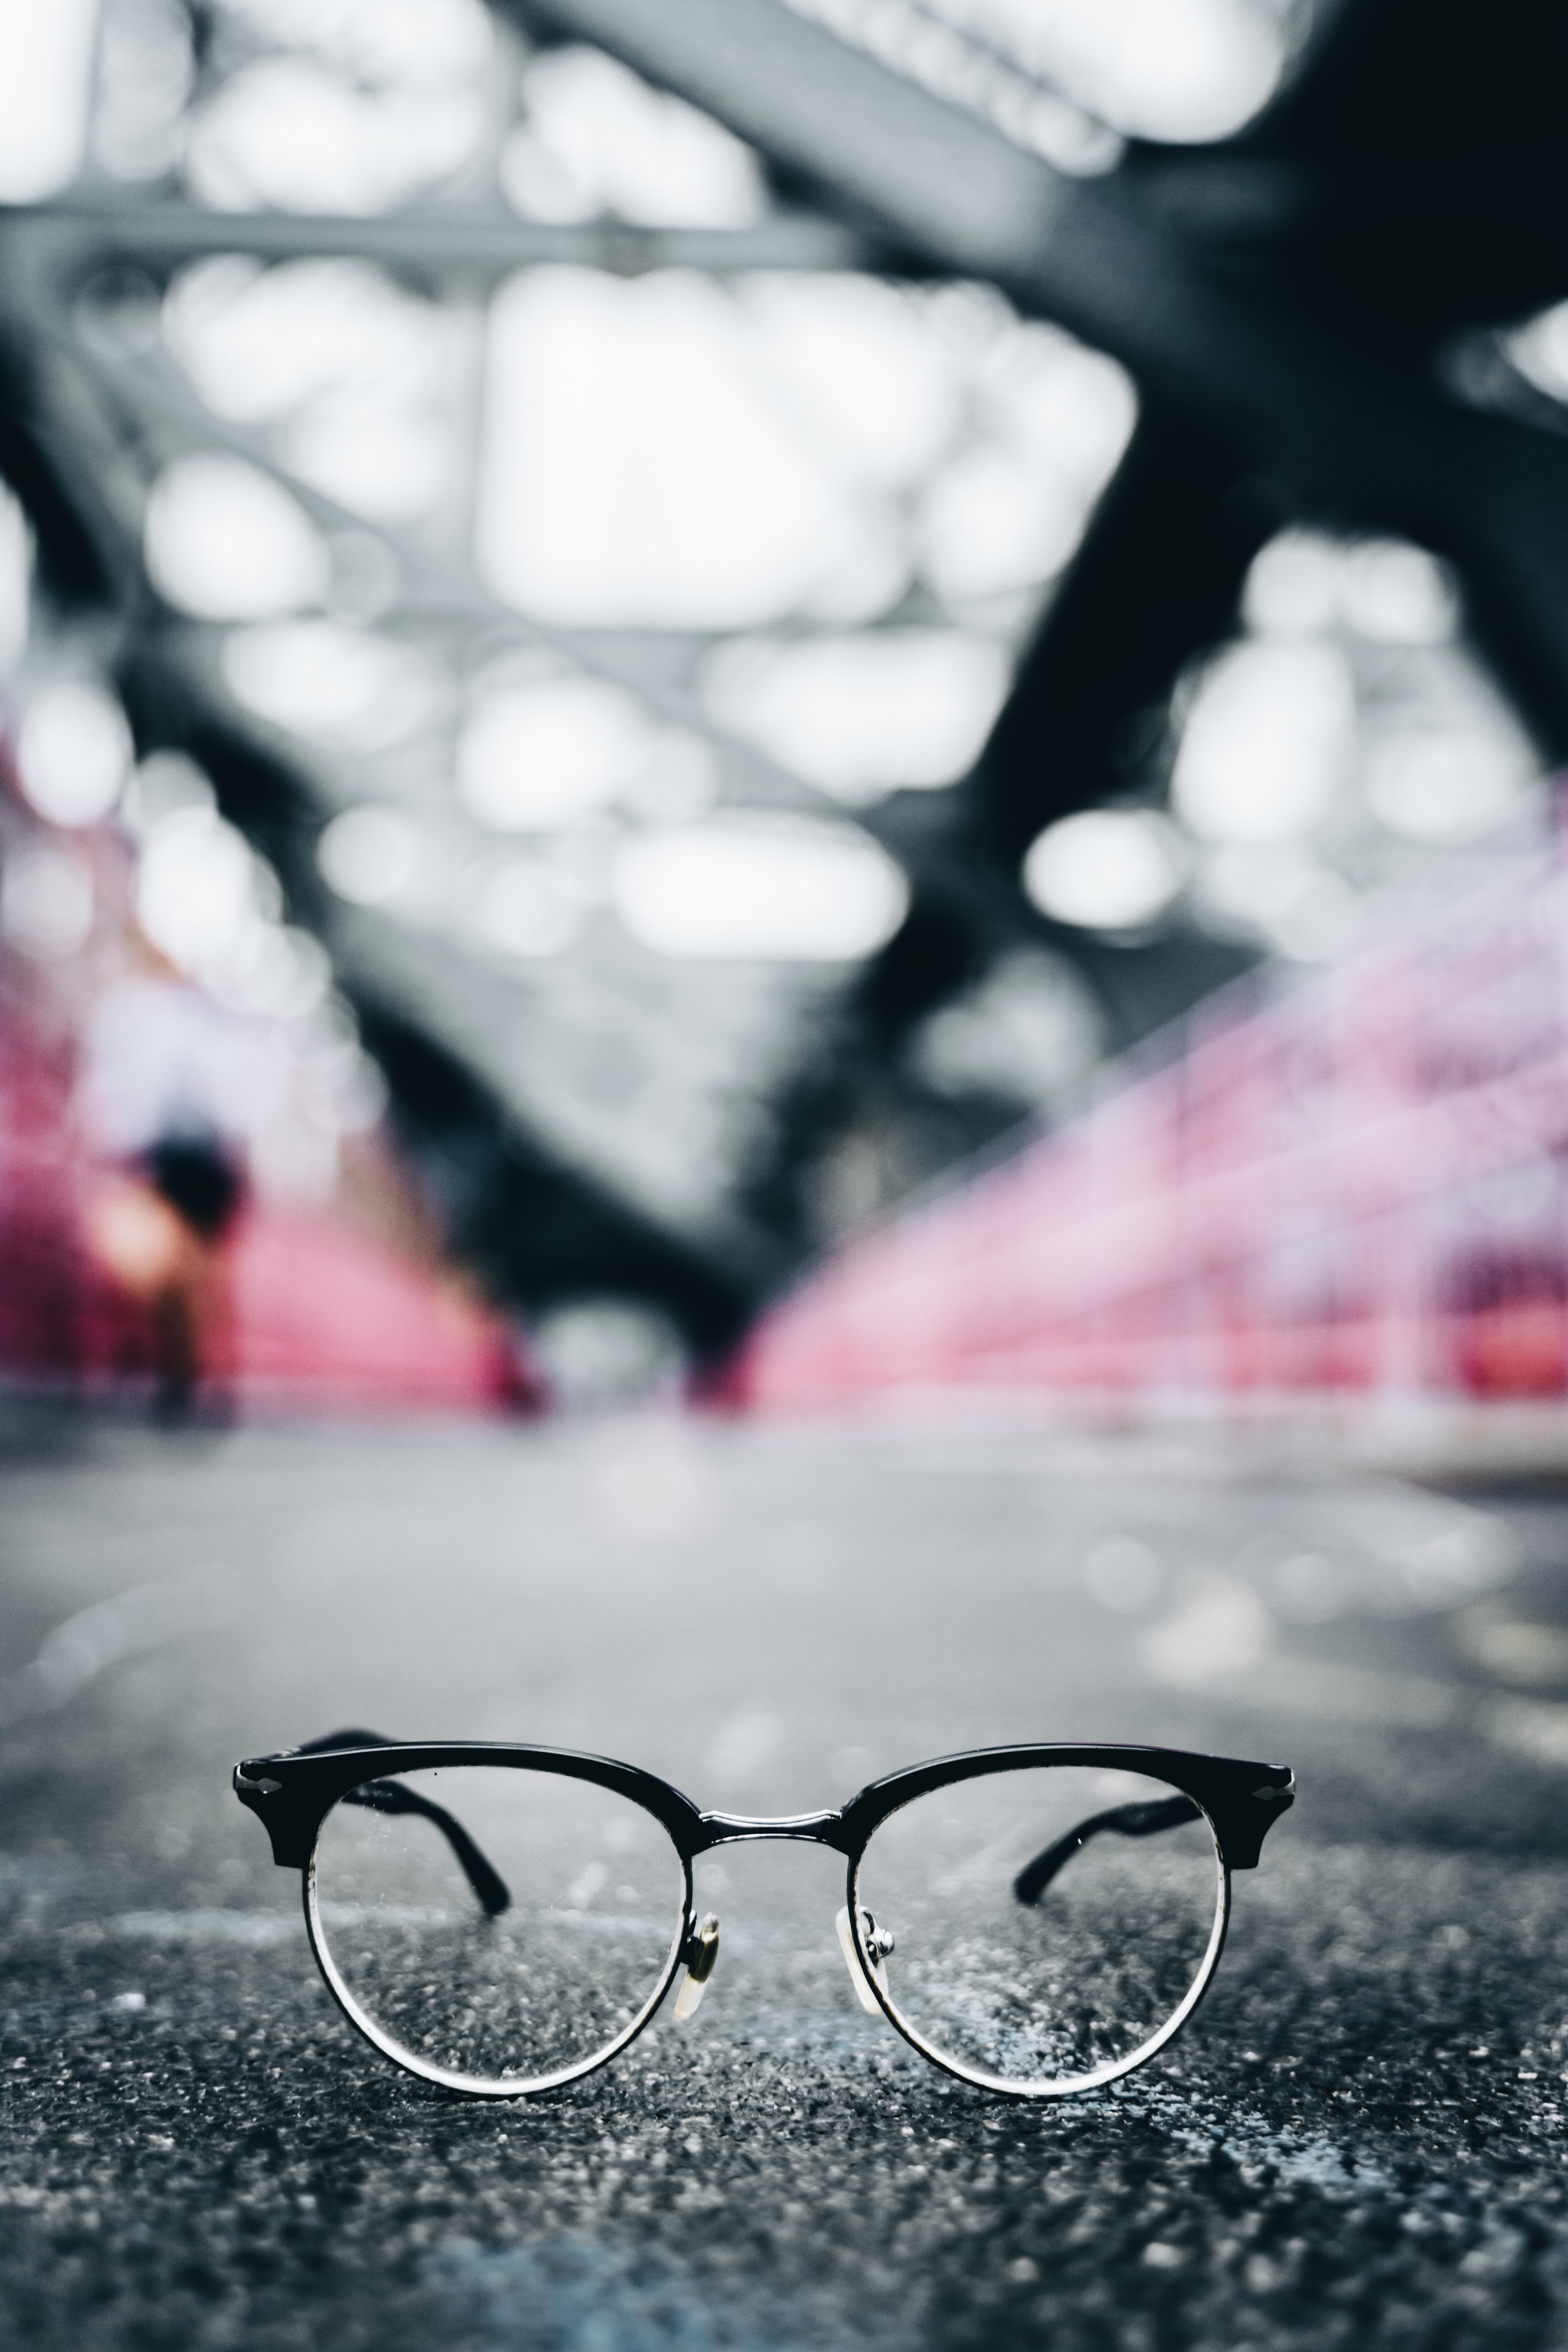 Lock Screen Spectacles